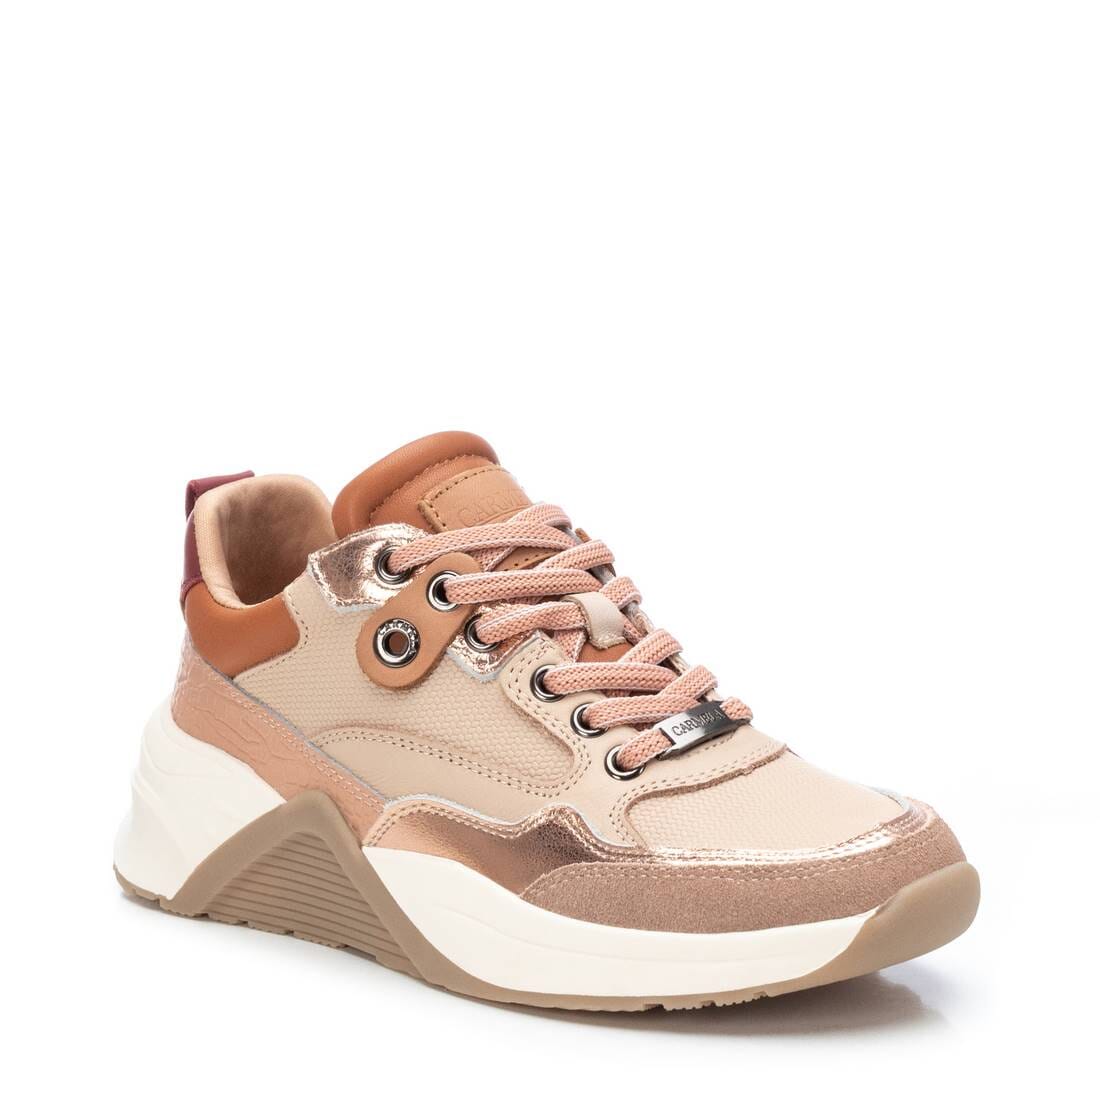 160259 Spanish Leather sneakers with colour blocking detail in beige/pink sneakers Sam Star shoes Beige/Pink 38 